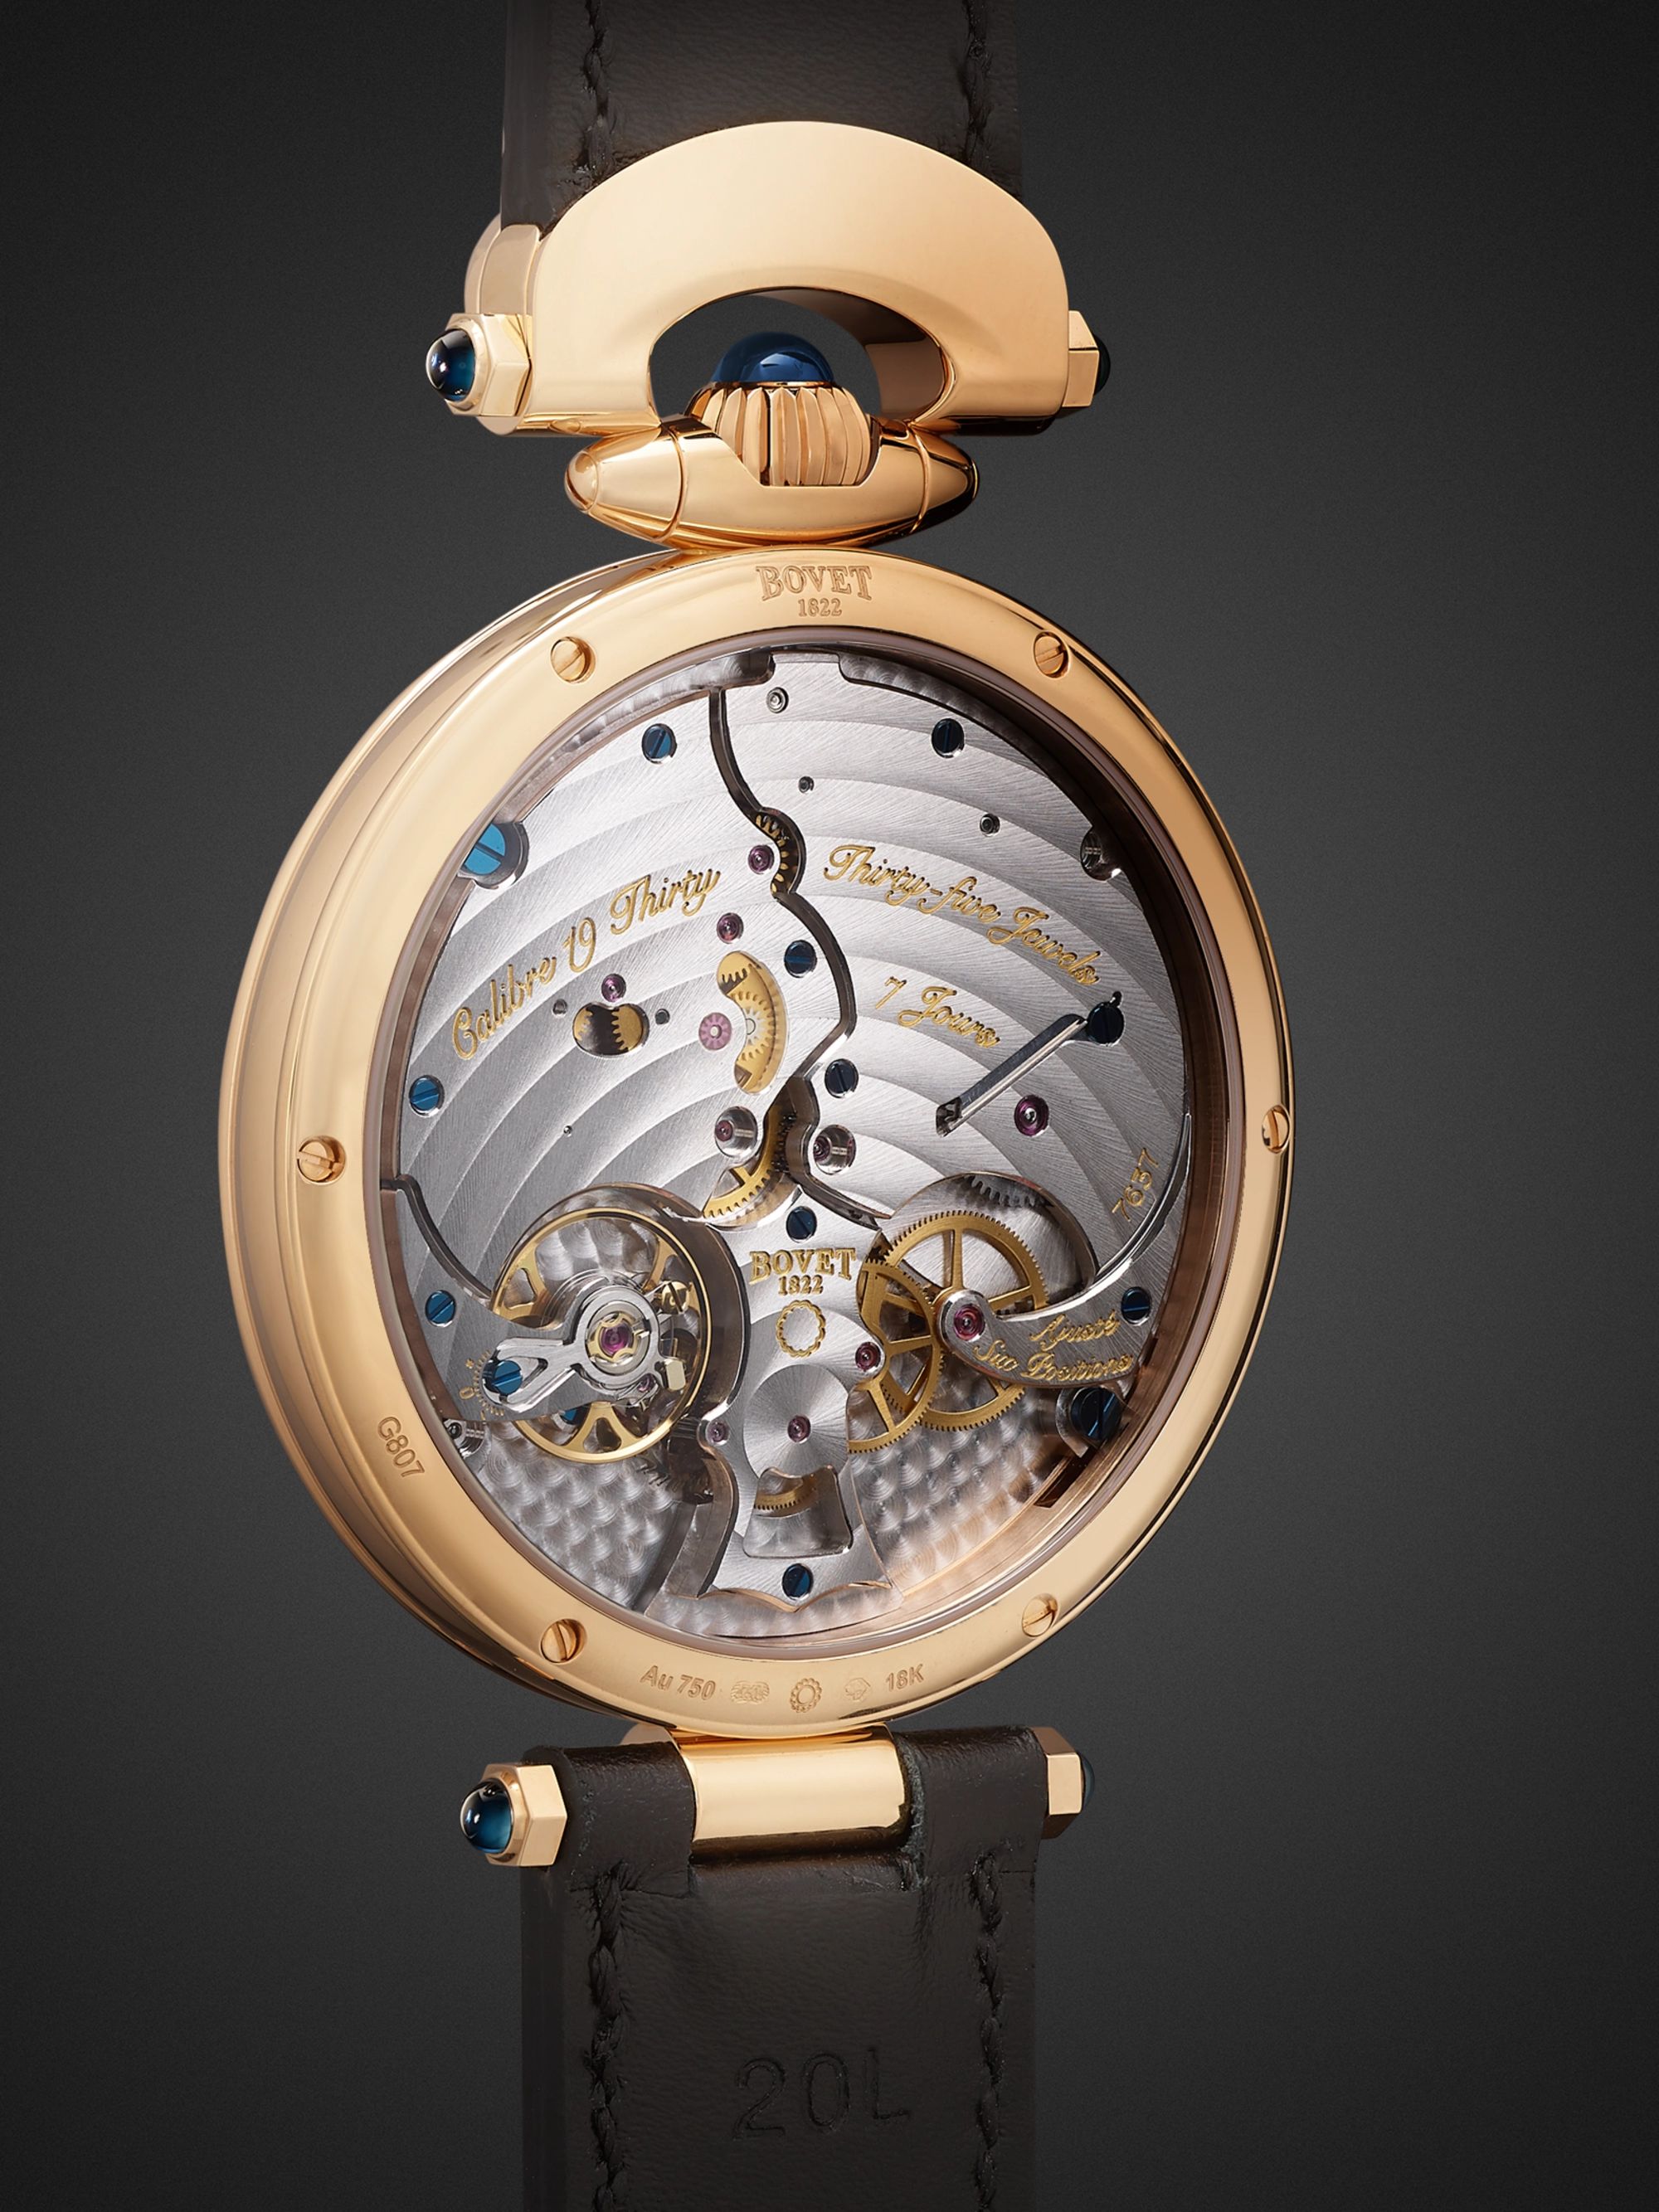 BOVET 19Thirty Fleurier Hand-Wound 42mm 18-Karat Rose Gold and Leather Watch, Ref. No. NTR0029